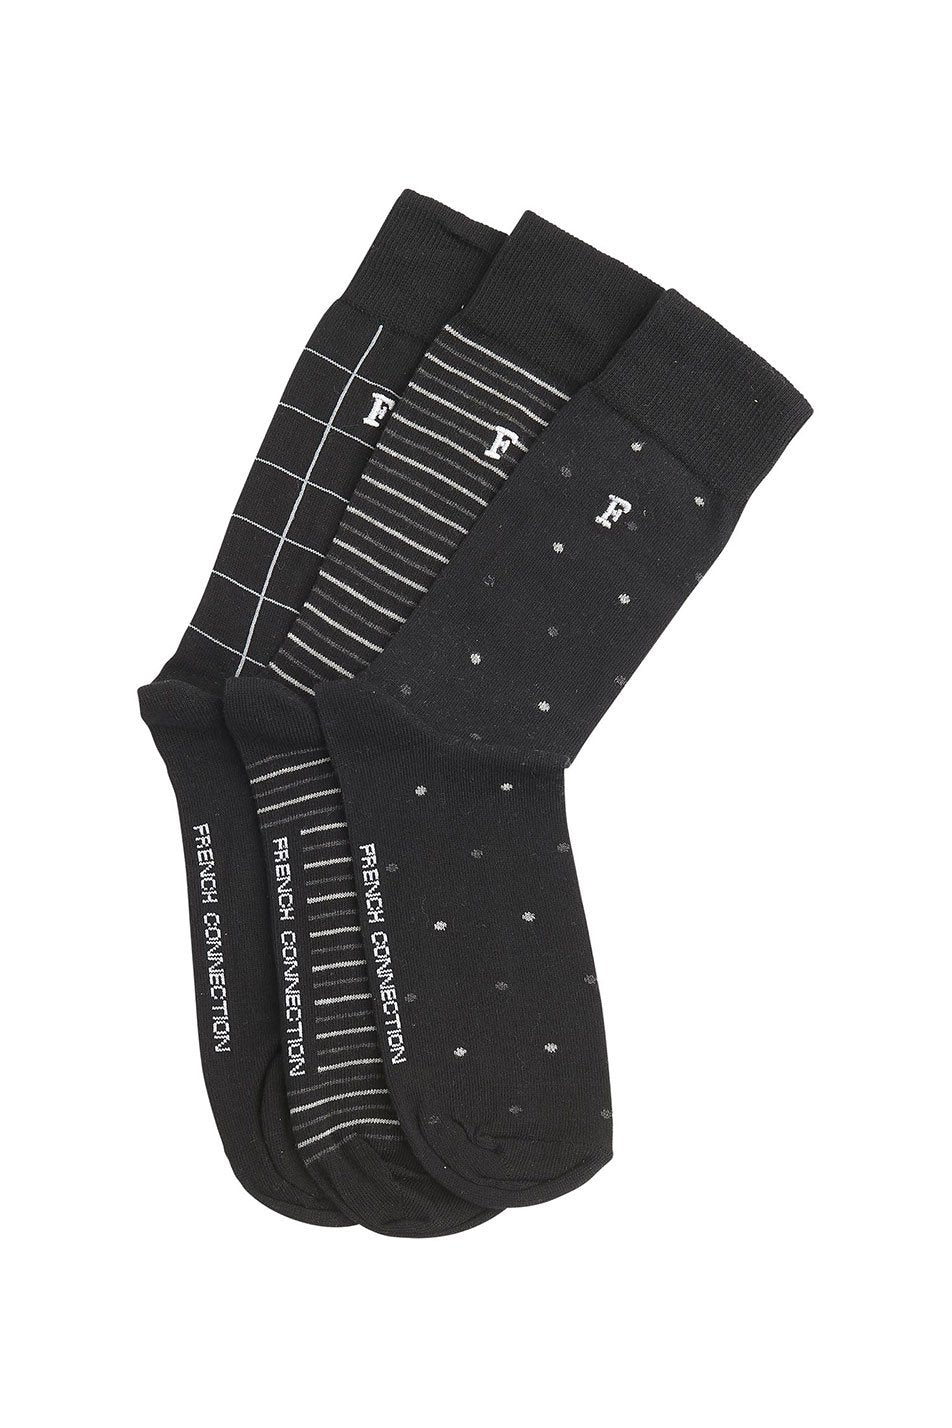 French Connection 3 Pack Waterfall Men's Socks